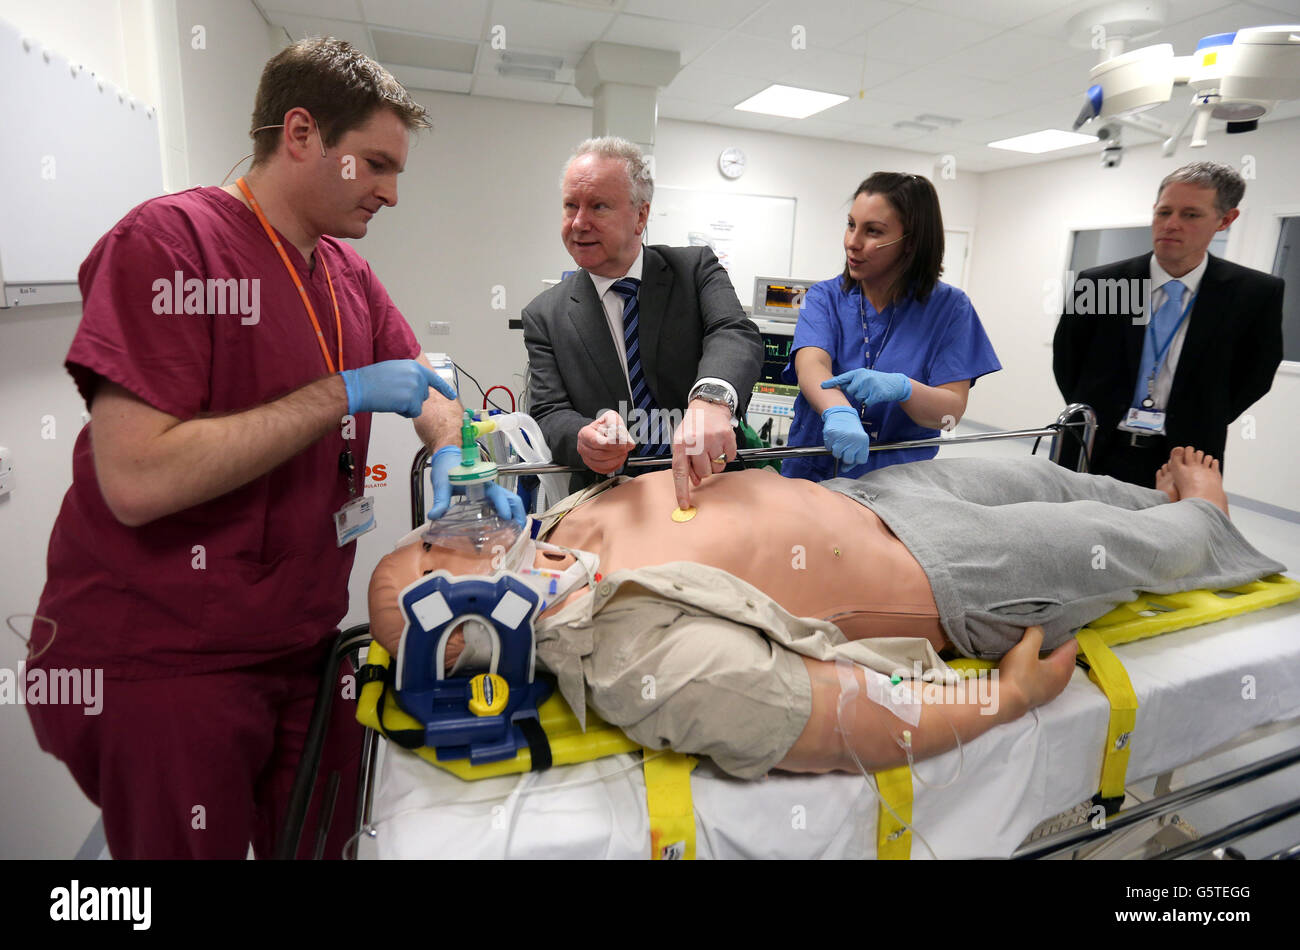 Health Secretary Alex Neil with robot patient "Stan" watched by registrar  Dr Stephen Hickey (far left) and Anesthetist Dr Donna Fraser (blue gown)  and Dr Michael Moneypenny (far right) during a visit